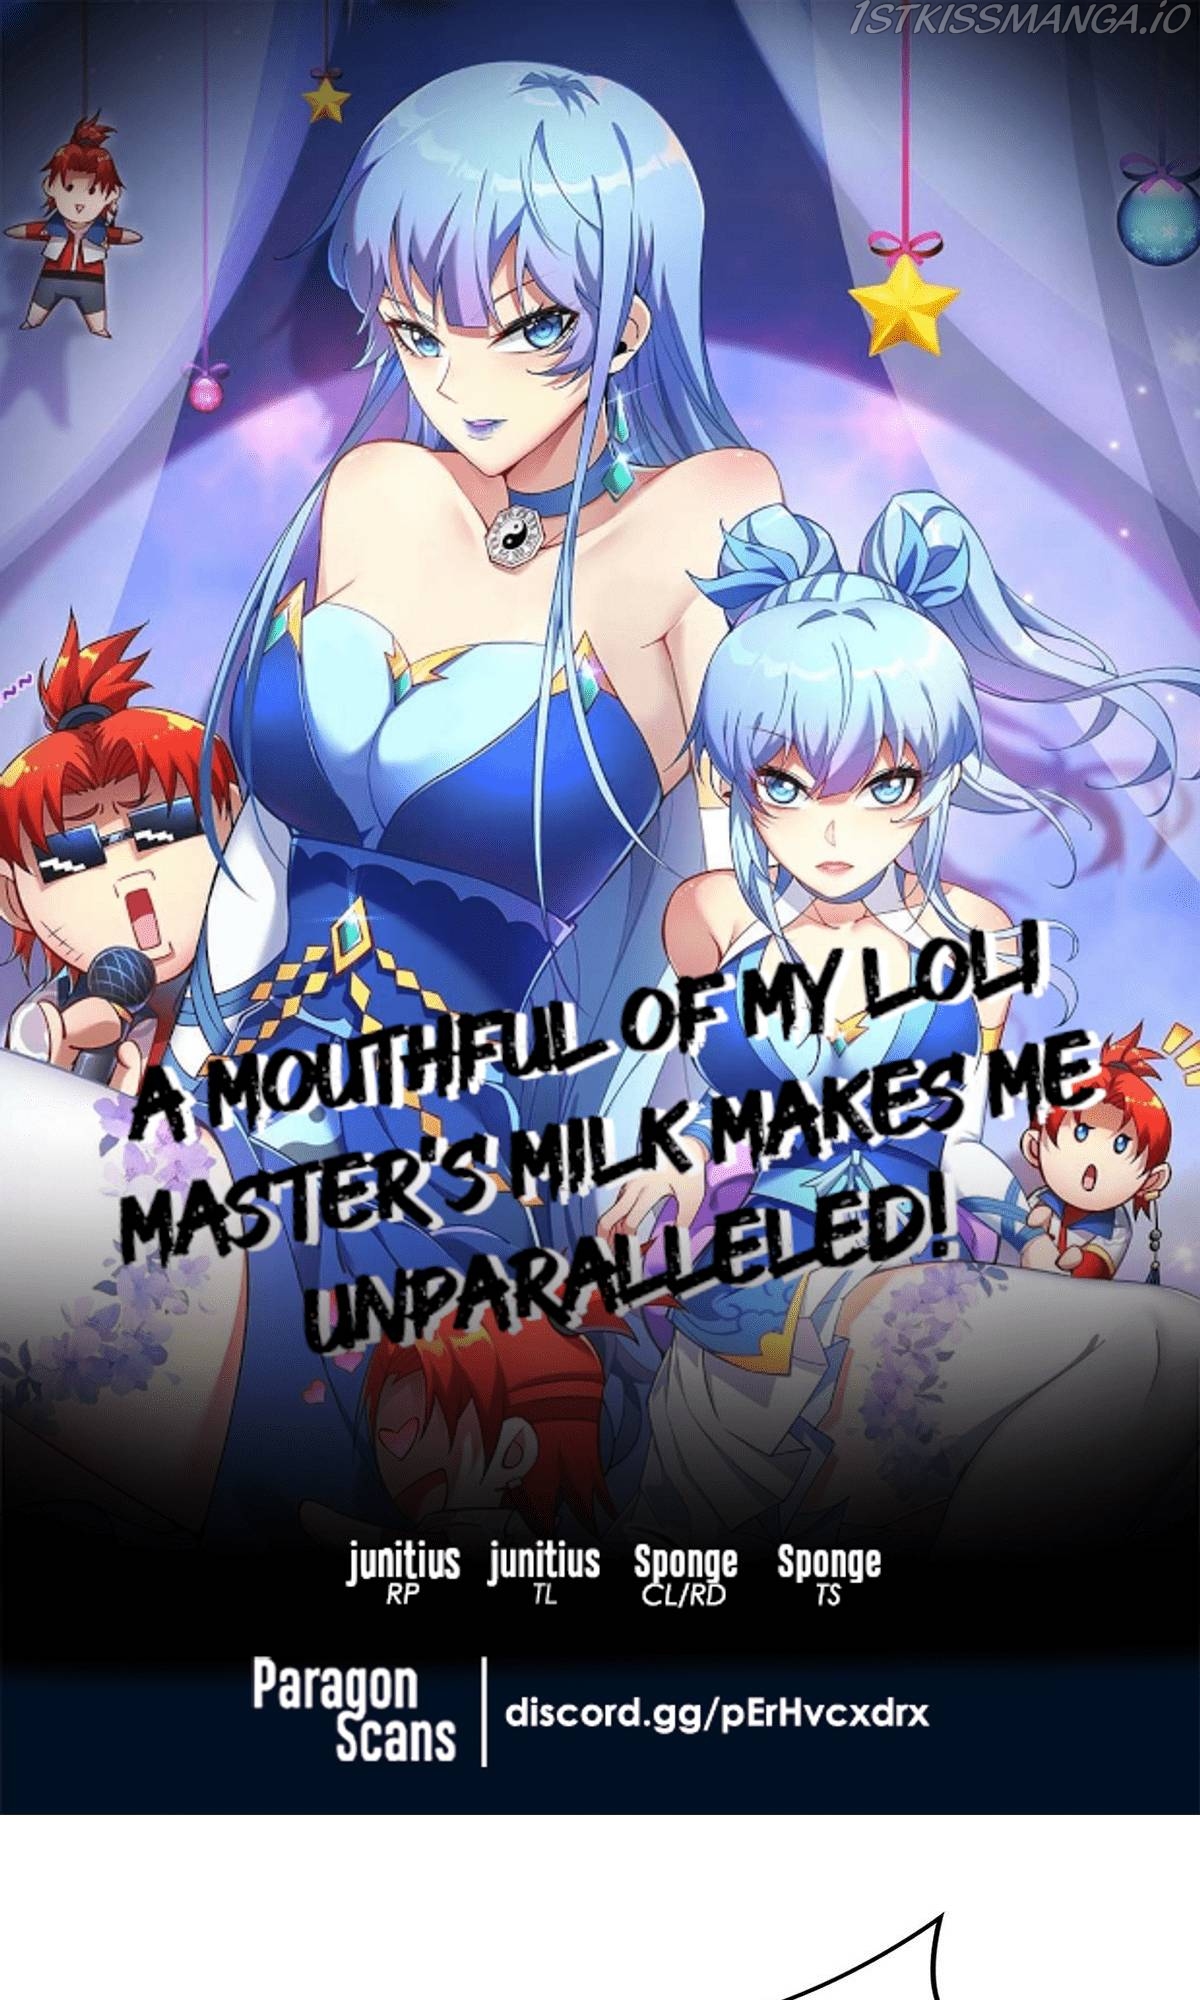 A Mouthful of My Loli Master’s Milk Makes Me Unparalleled Chapter 10 - Page 0